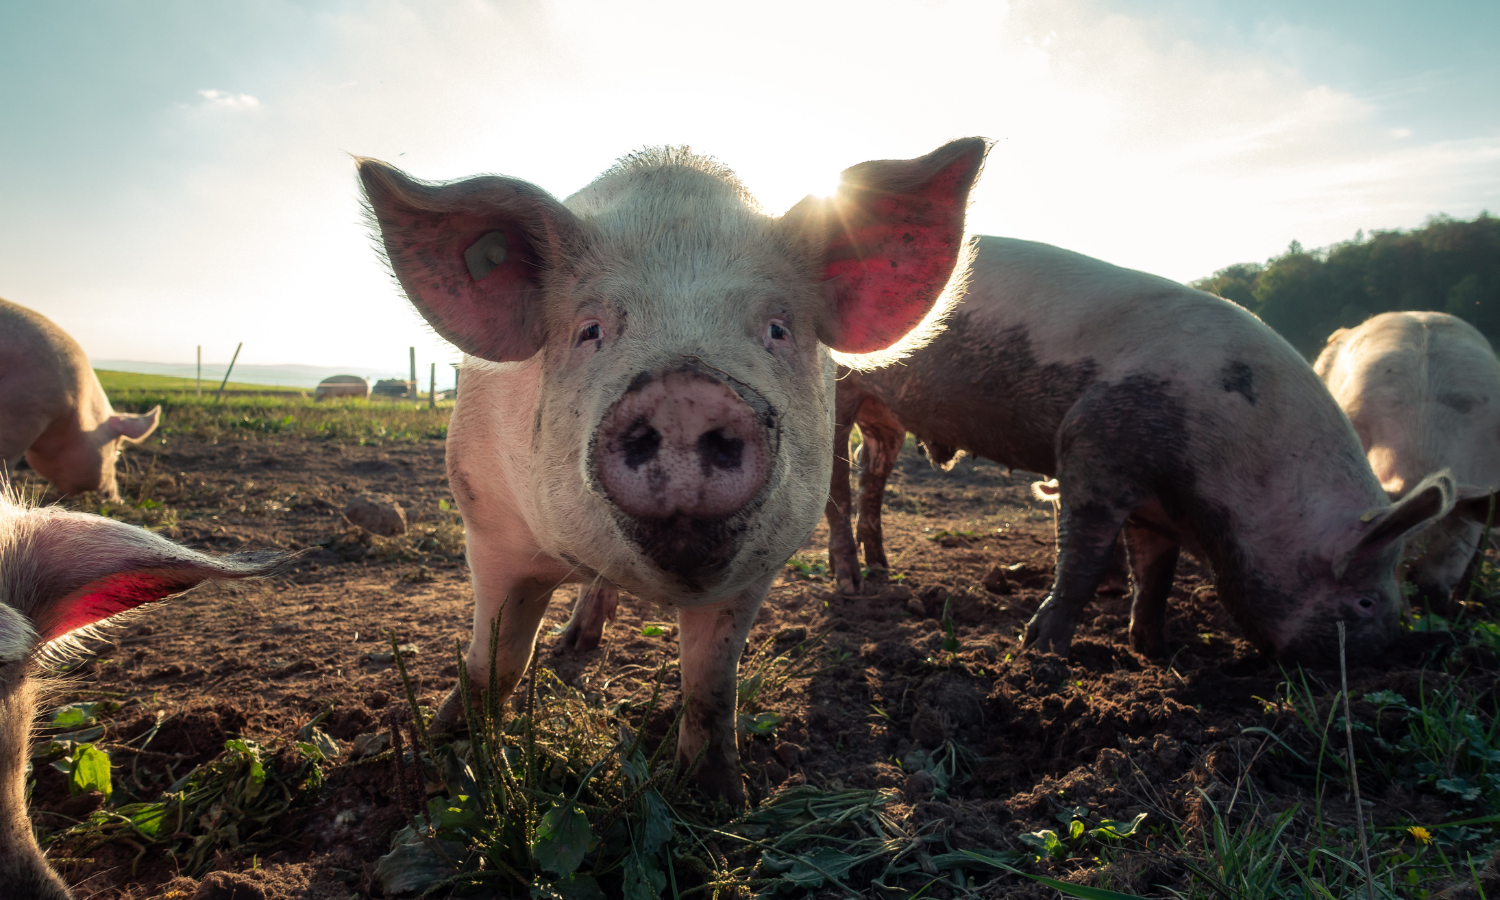 After decades of research, the world’s first vaccine for African Swine Fever has just been approved to be sold commercially in Vietnam.